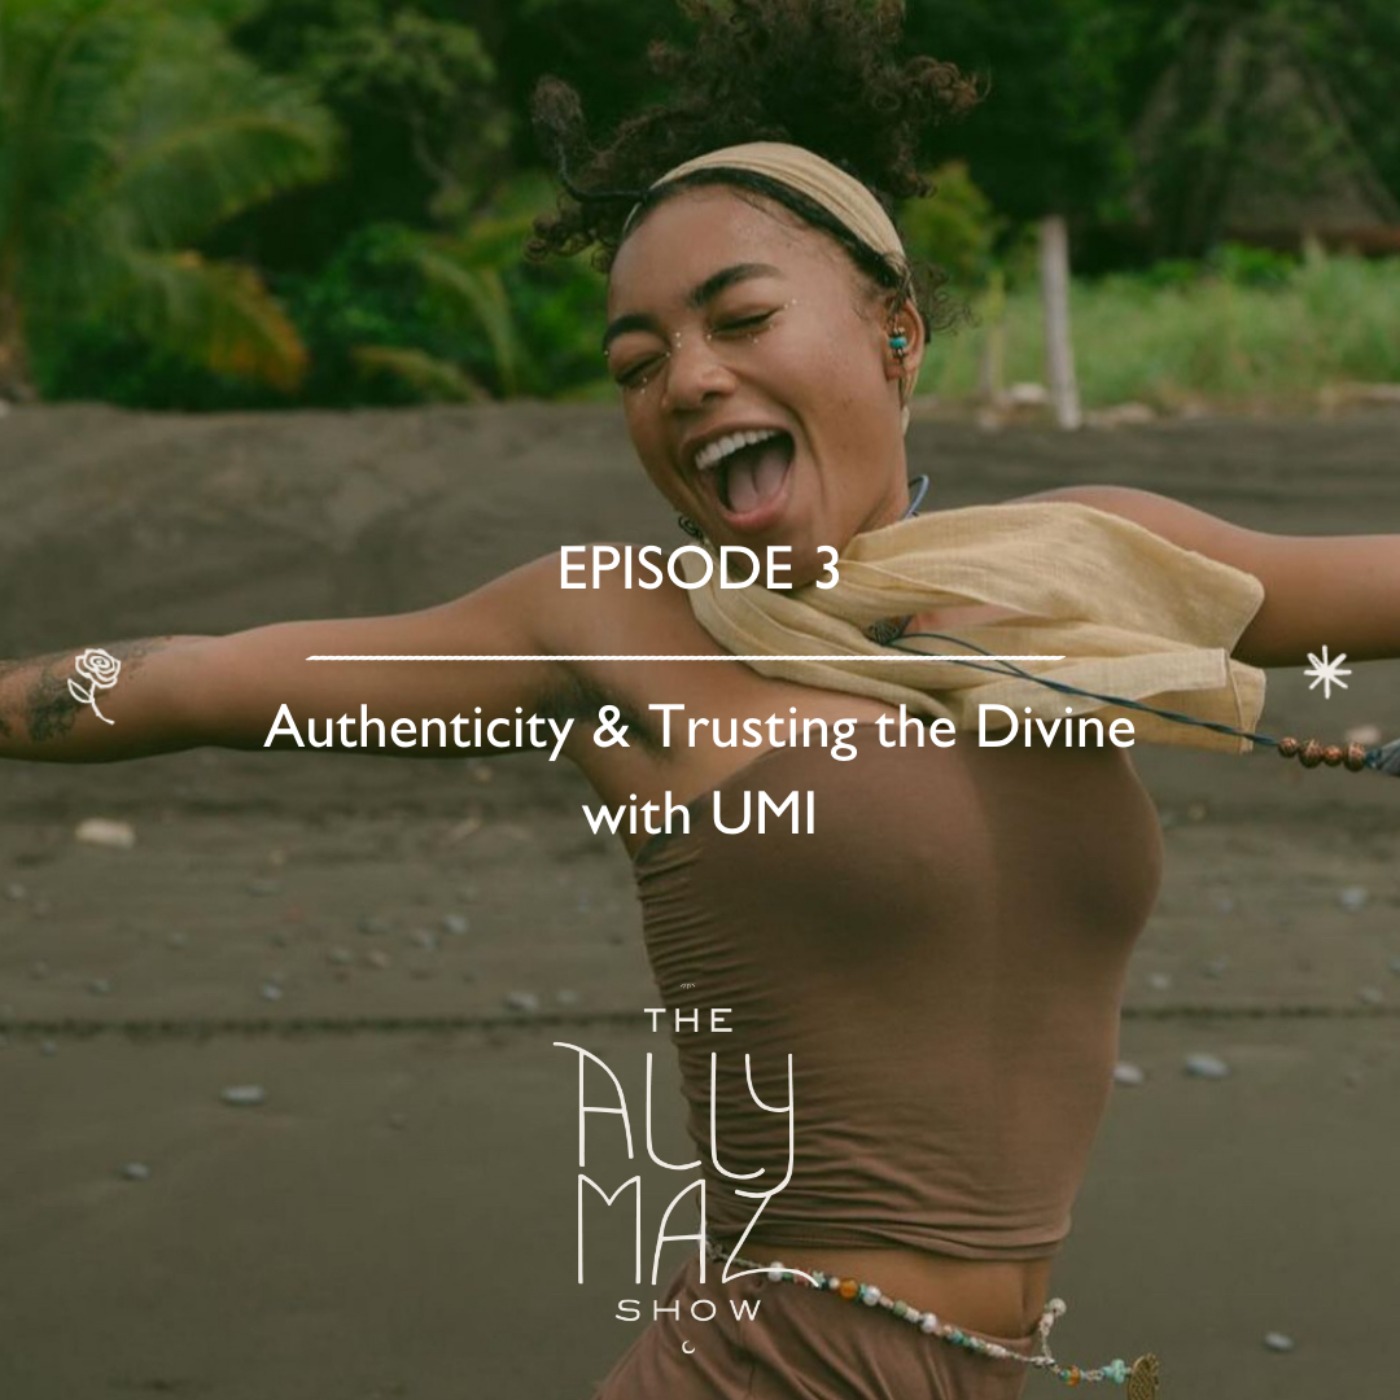 Authenticity & Trusting the Divine with UMI